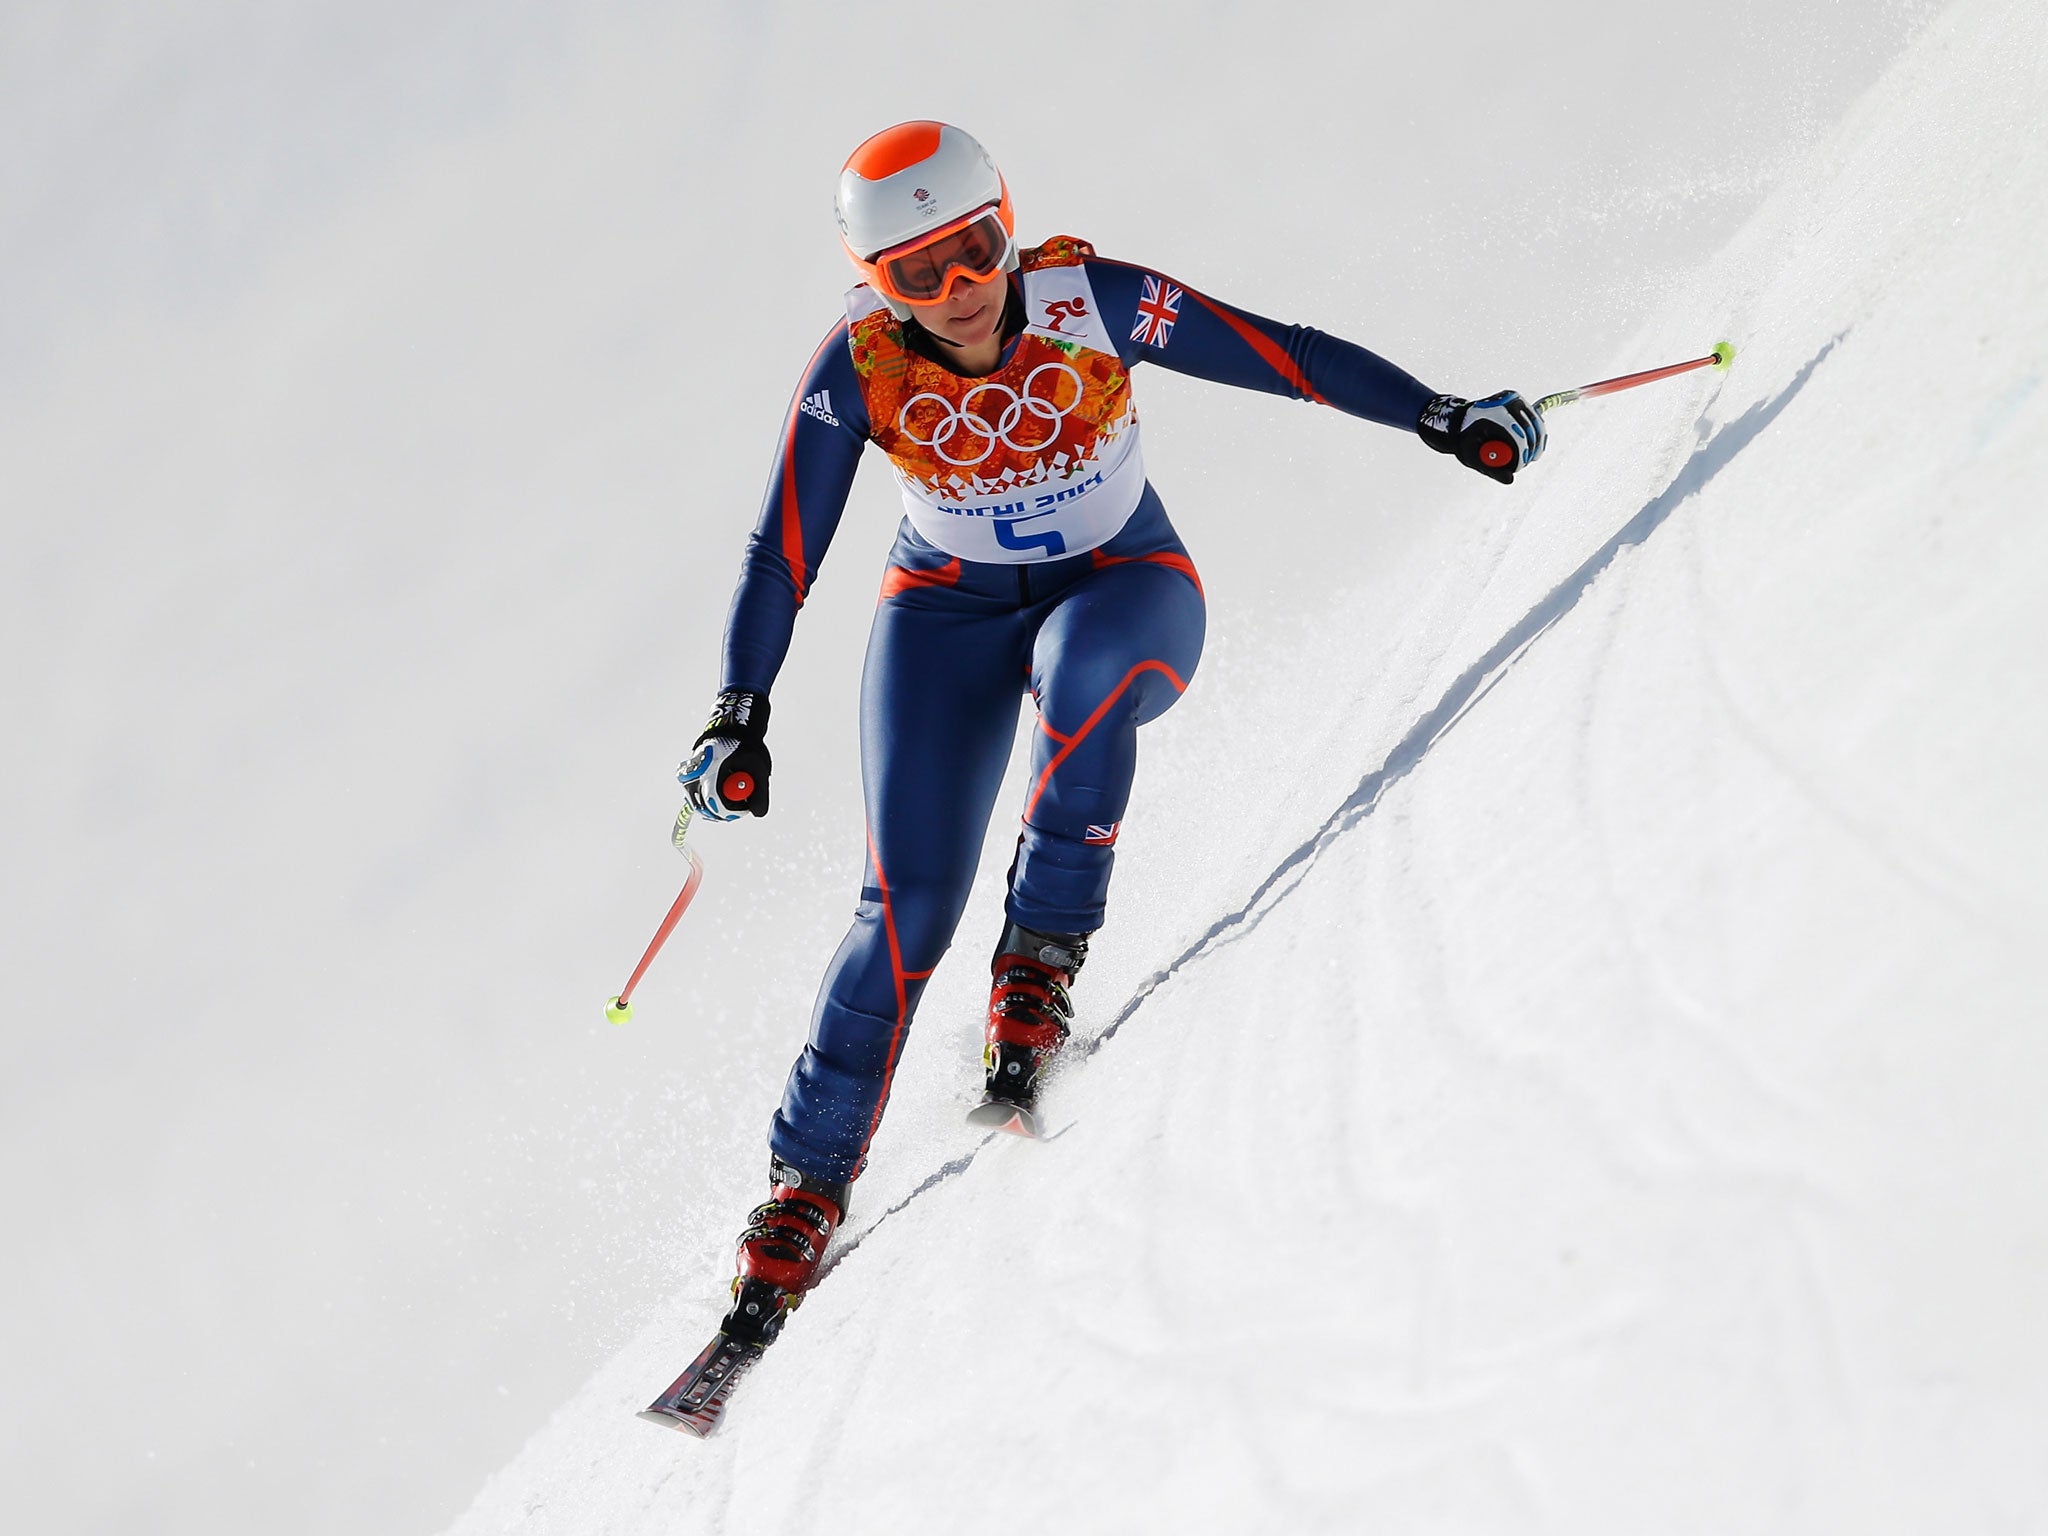 Chemmy Alcott has pulled out of the super combined skiing event to focus on Wednesday's downhill event